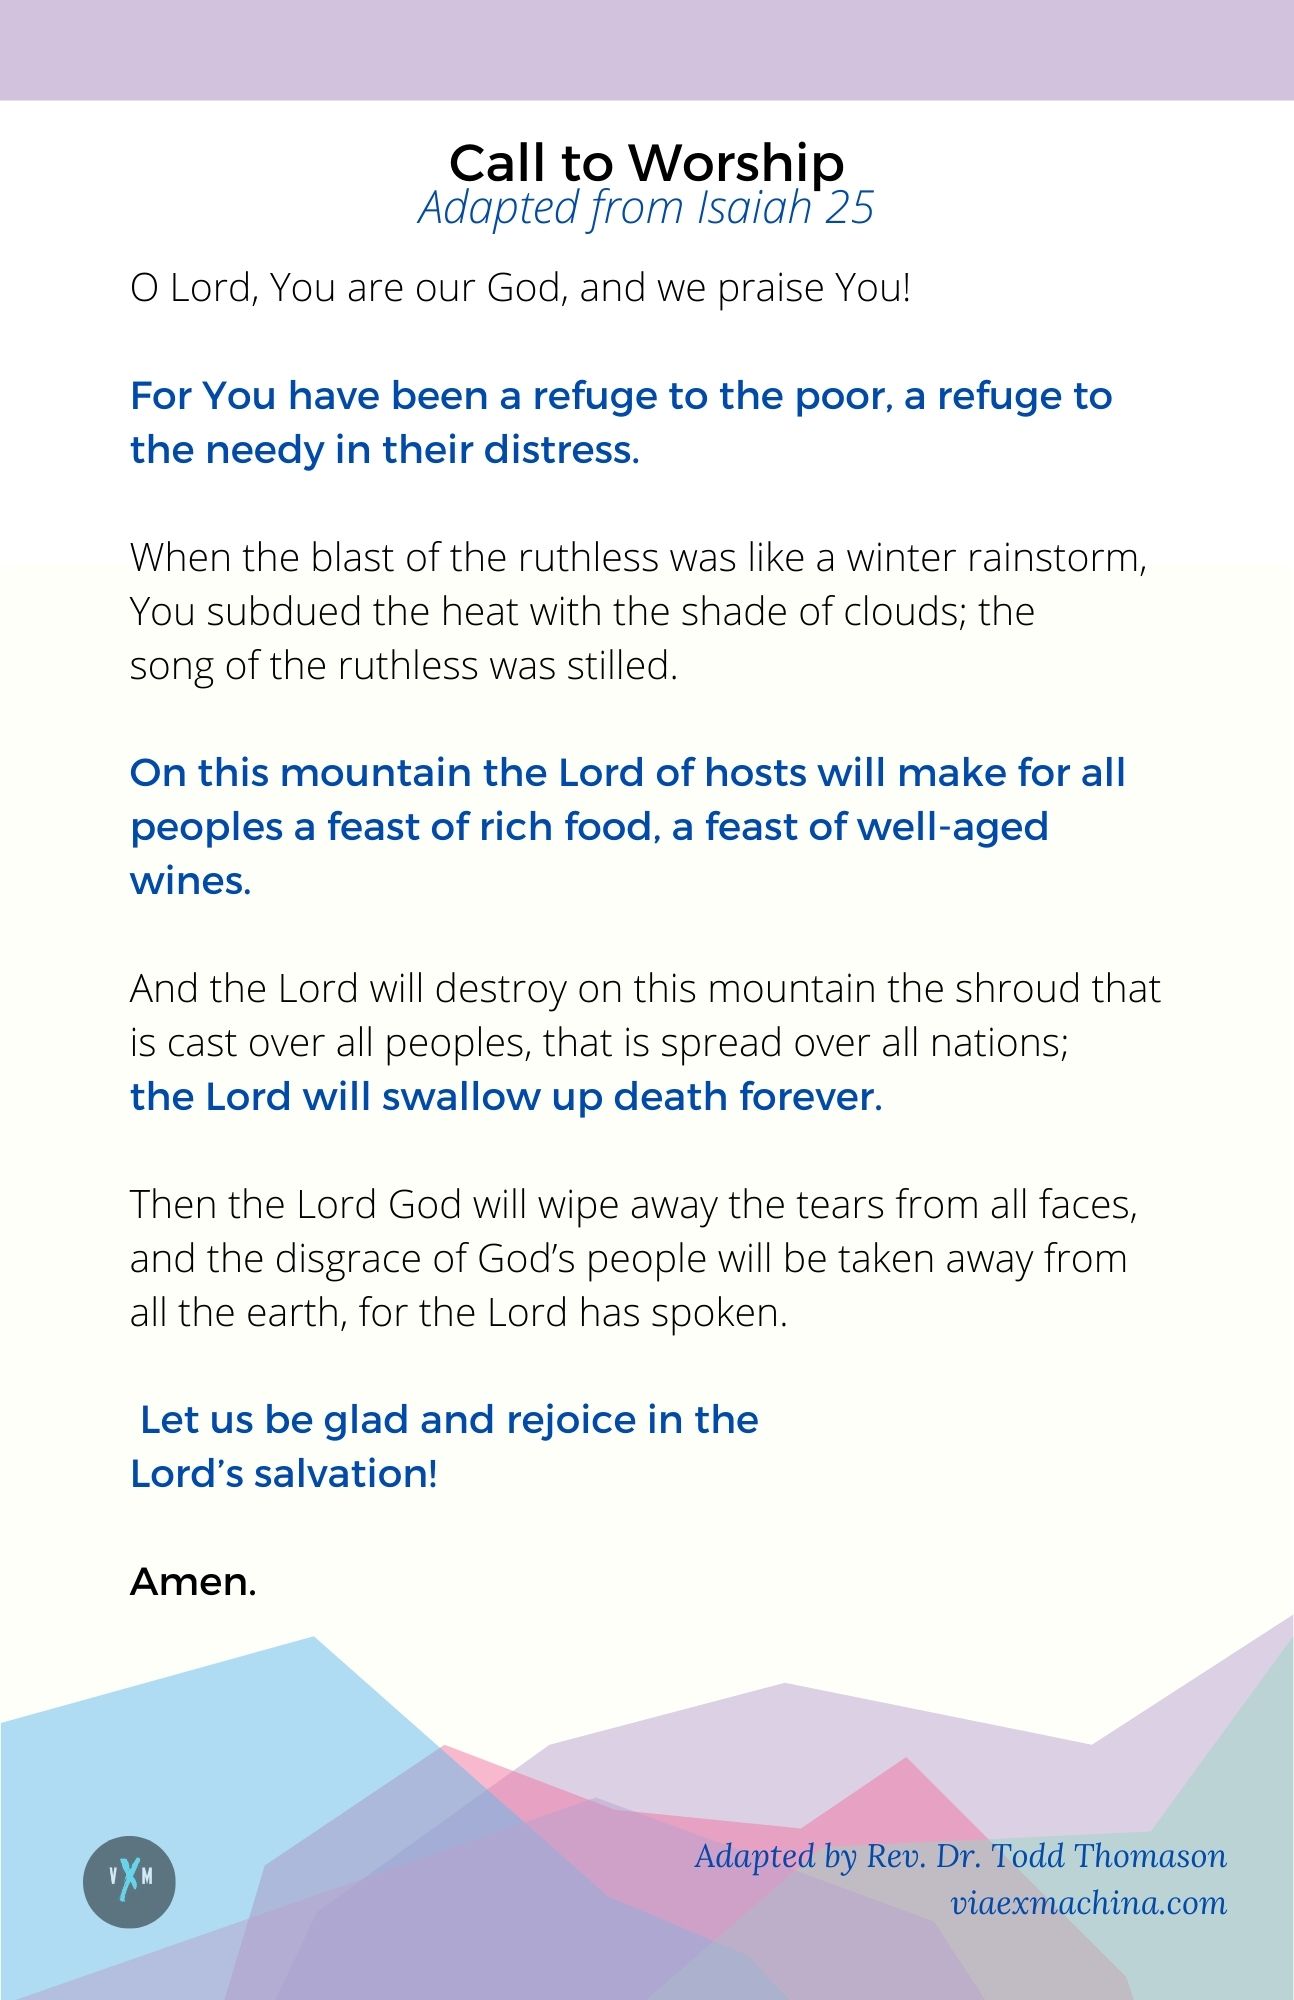 Call to Worship Adapted from Isaiah 25 " O Lord, You are our God, and